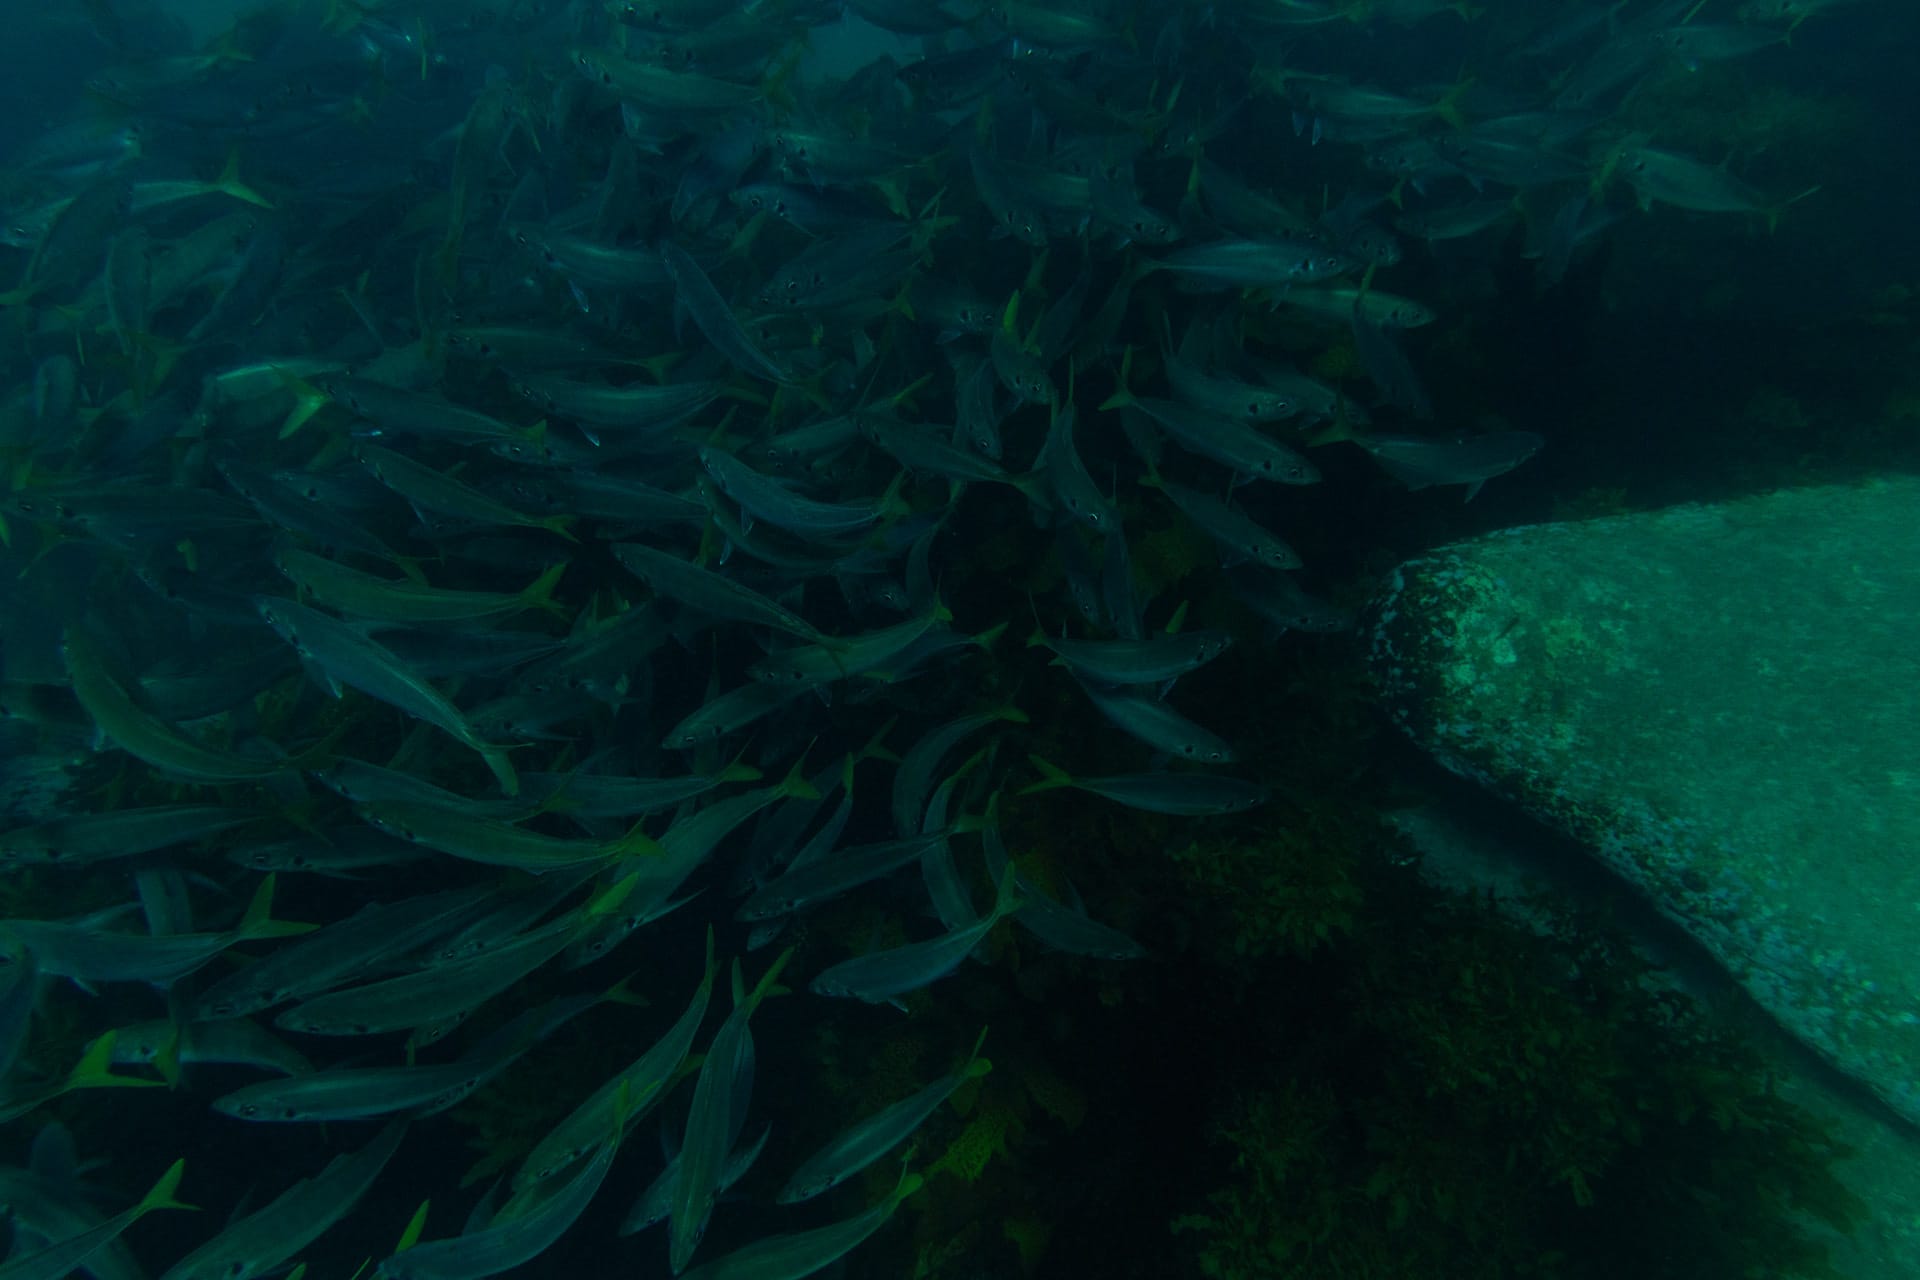 Meet The Underwater Residents of Sydney’s Cabbage Tree Bay Aquatic Reserve – Photo Essay